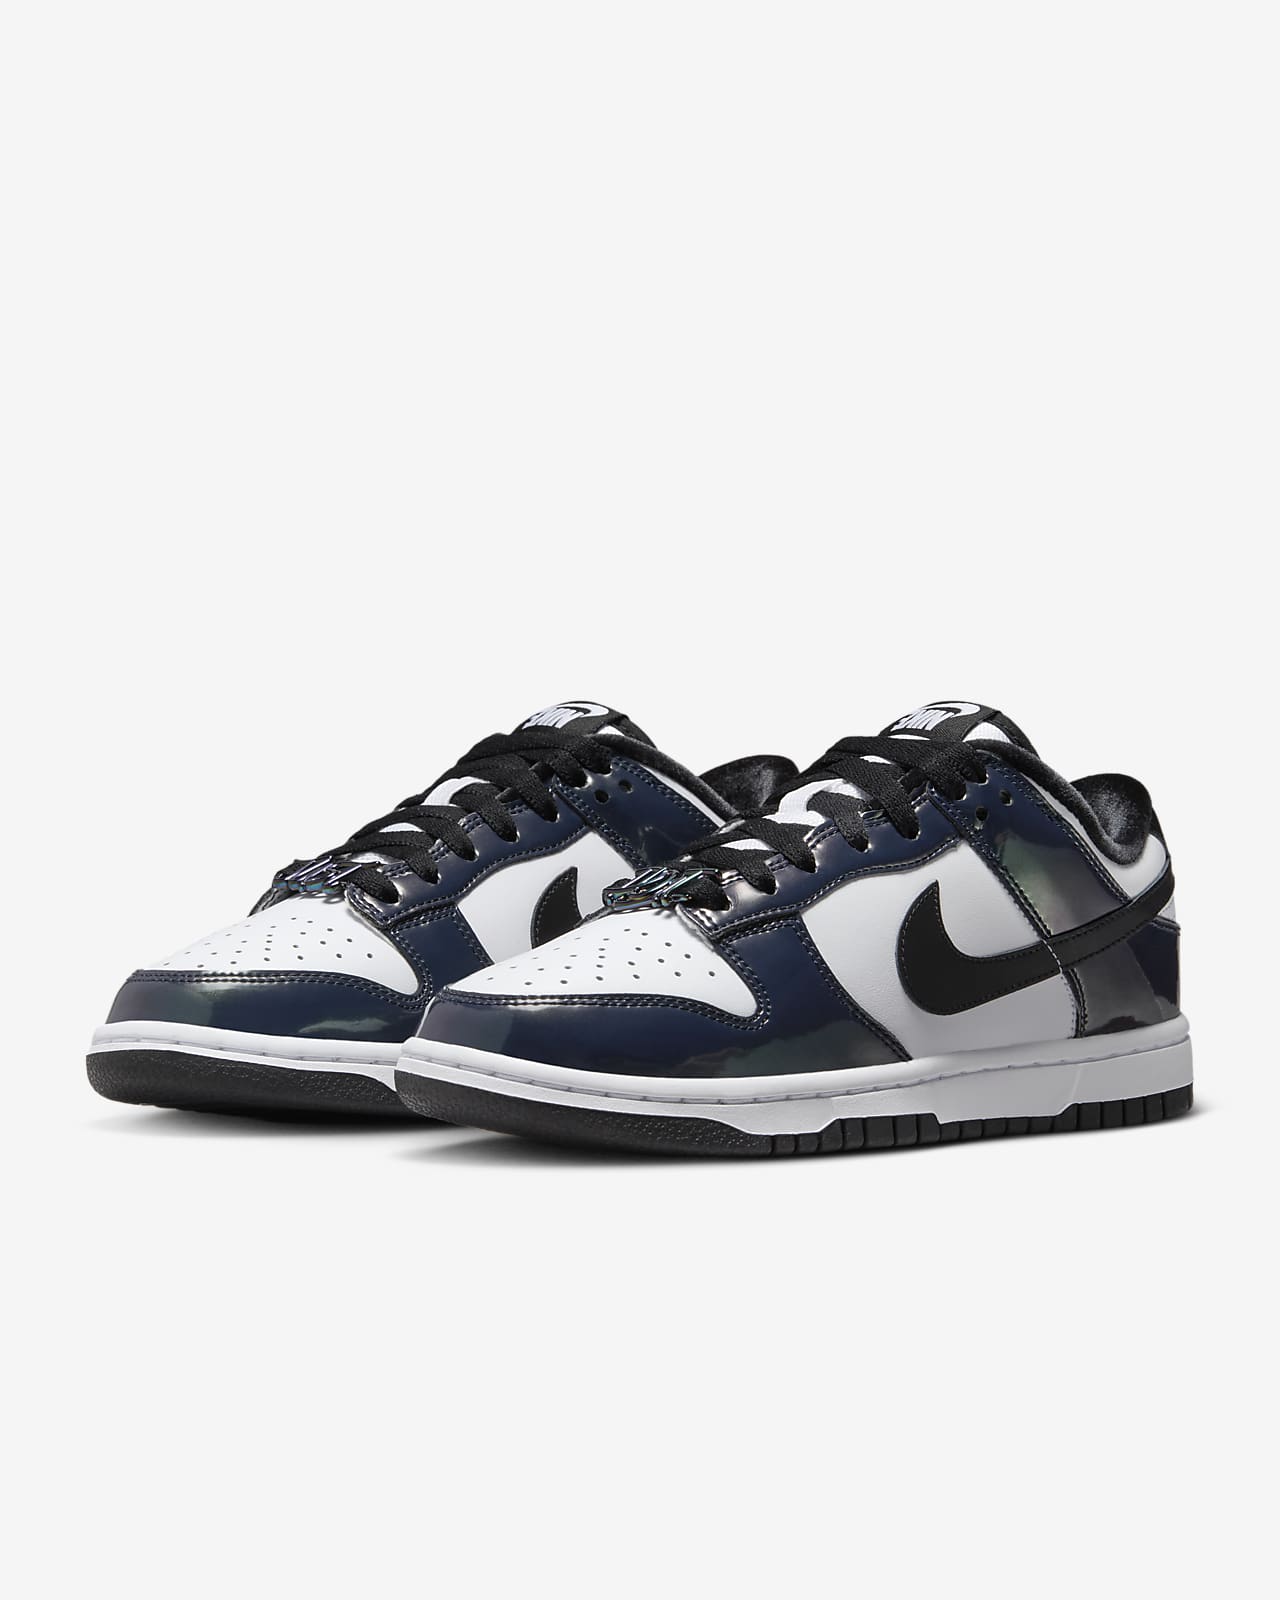 Nike dunk low special edition